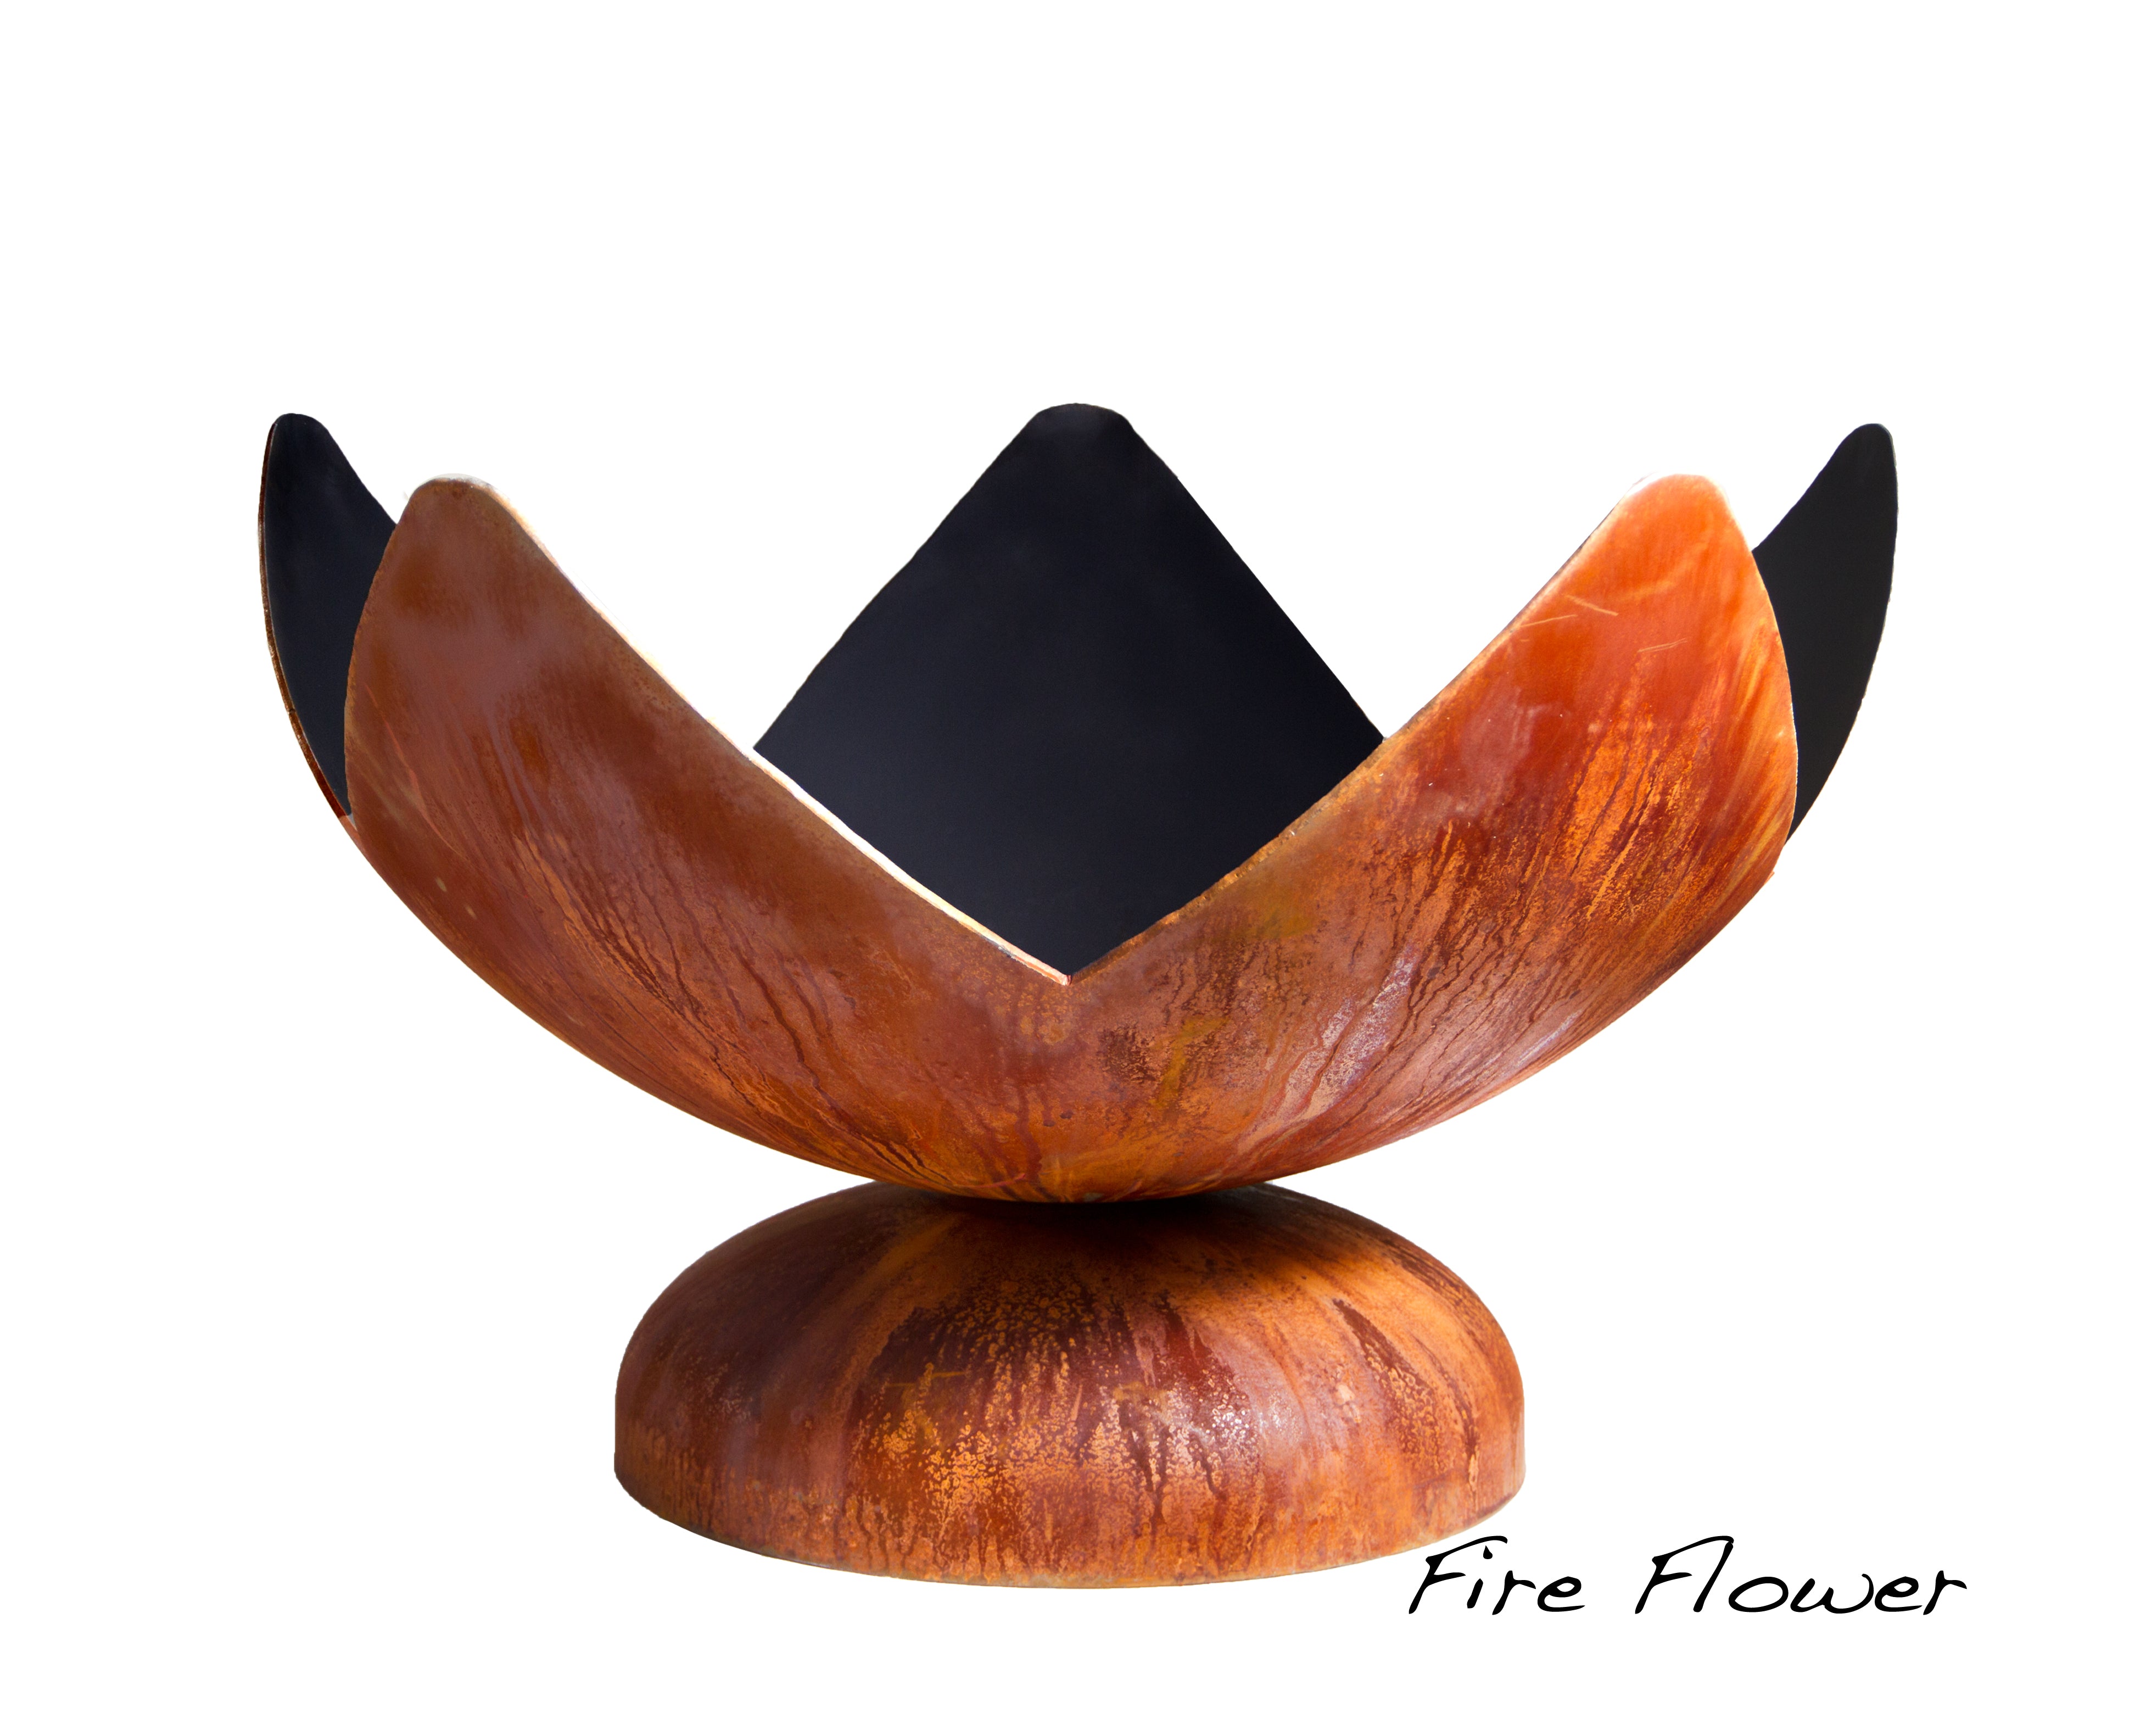 Ohio Flame Fire Flower Artisan Fire Bowl with Patina Finish - Fireplace Choice